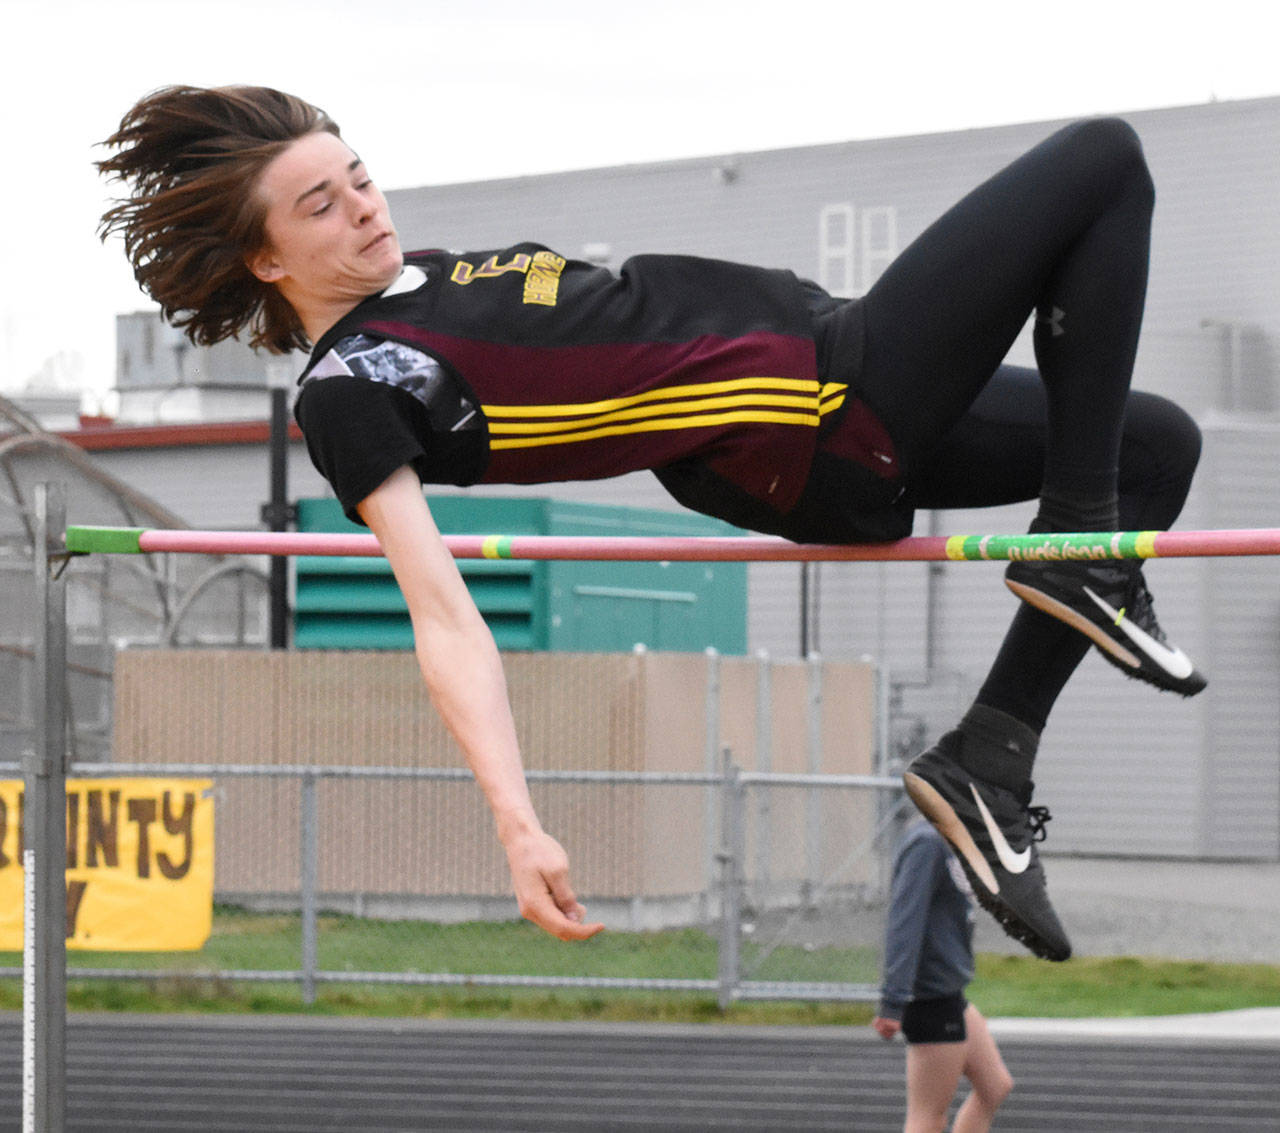 In related news, Enumclaw High freshman Jack Morse took first in the high jump April 4, helping the Hornets to a 91-53 victory over visiting Kentridge. Photo by Kevin Hanson